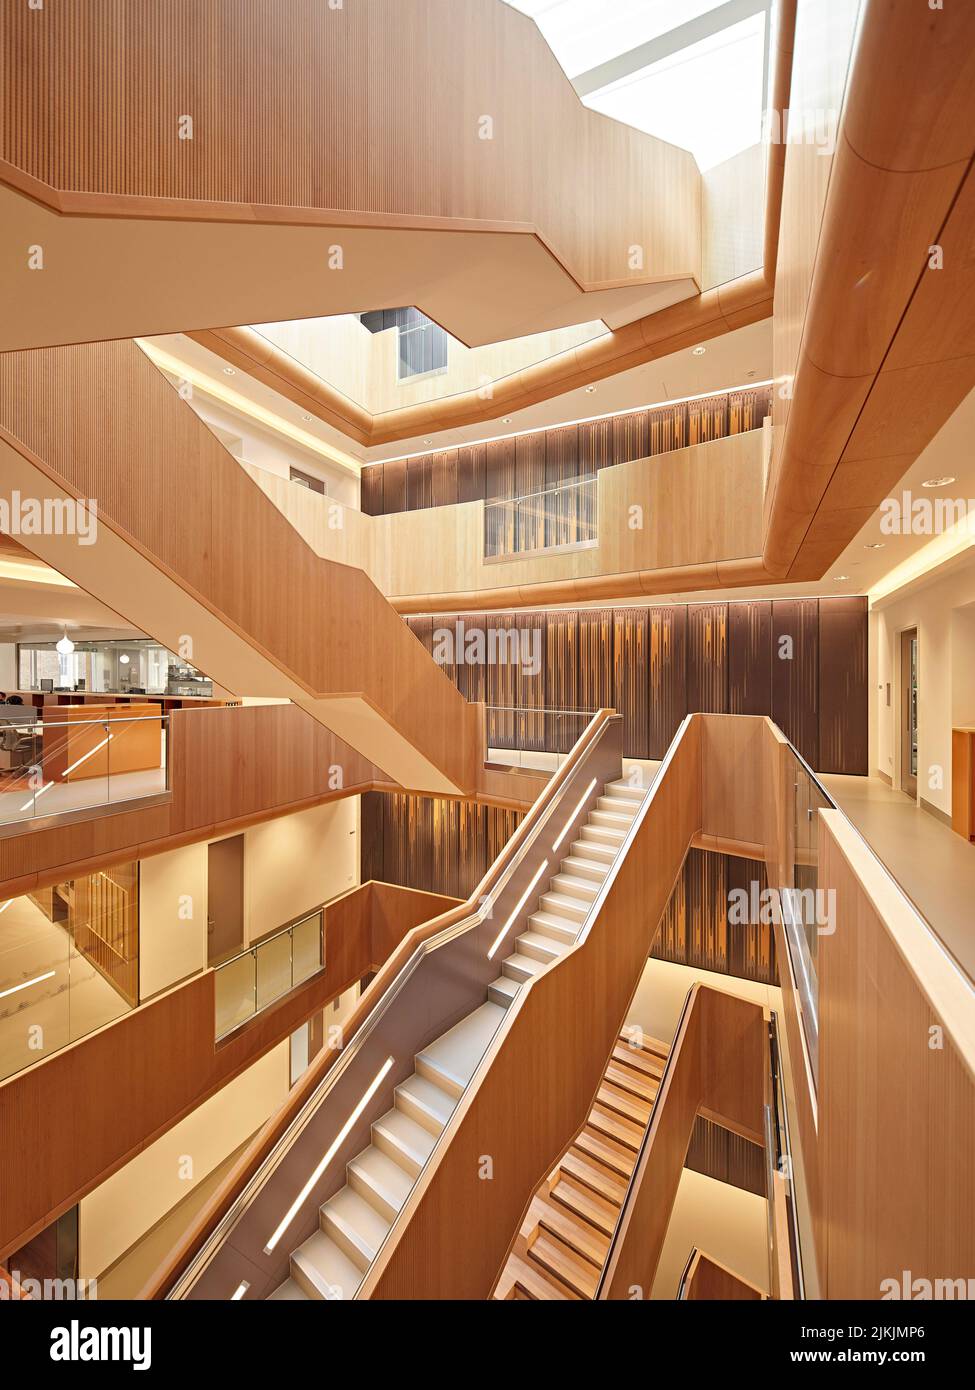 Cantilever stairways in full-height atrium. Dorothy Crowfoot Hodgkin Building, Oxford, United Kingdom. Architect: Hawkins Brown Architects LLP, 2021. Stock Photo